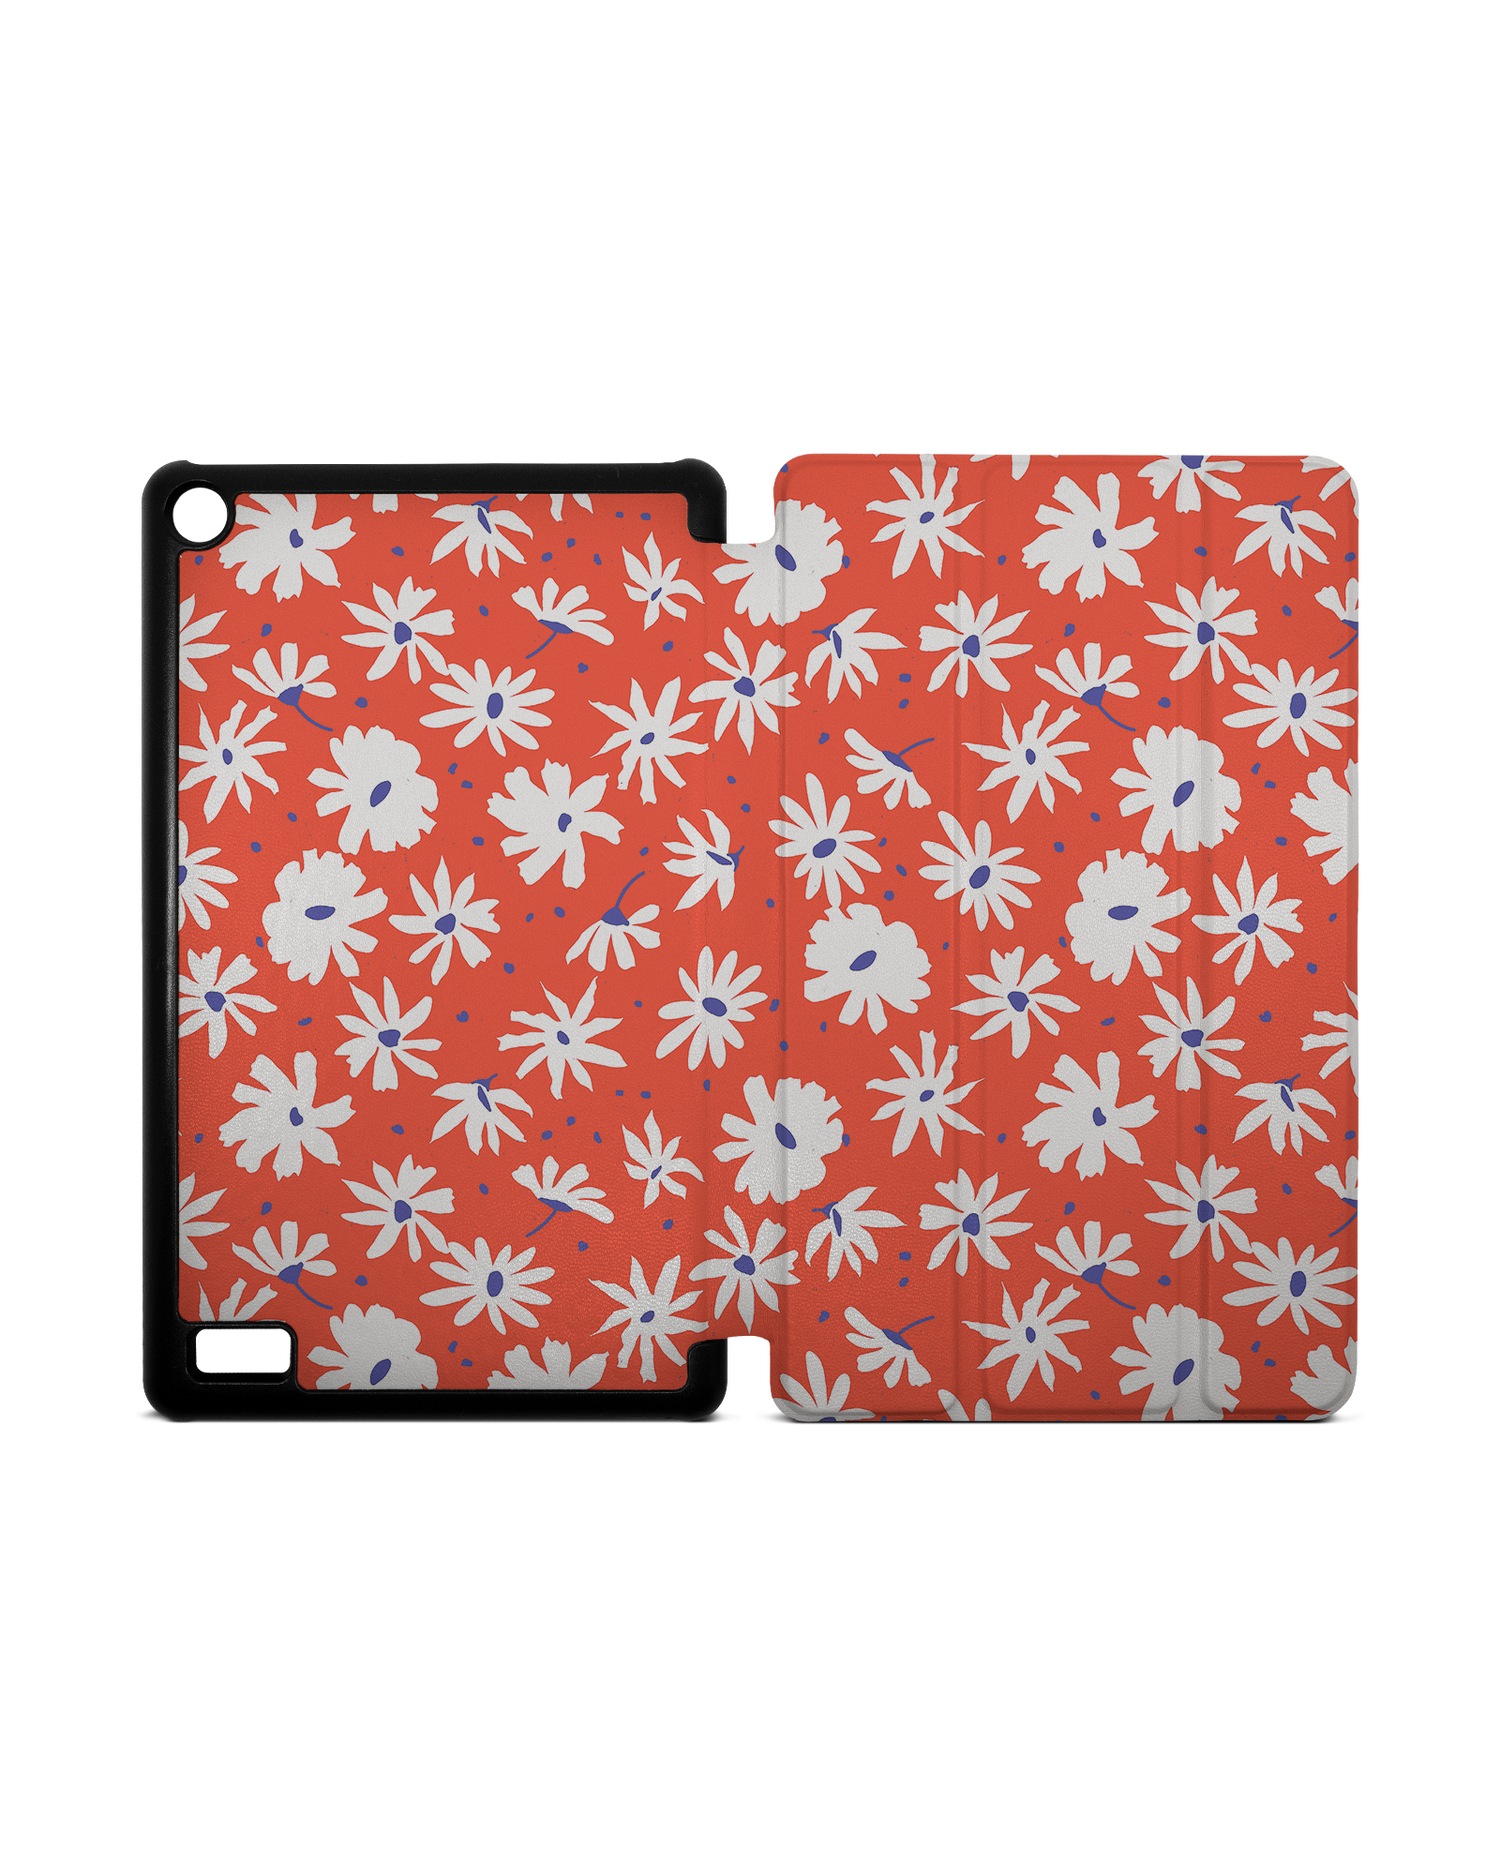 Retro Daisy Tablet Smart Case for Amazon Fire 7: Opened